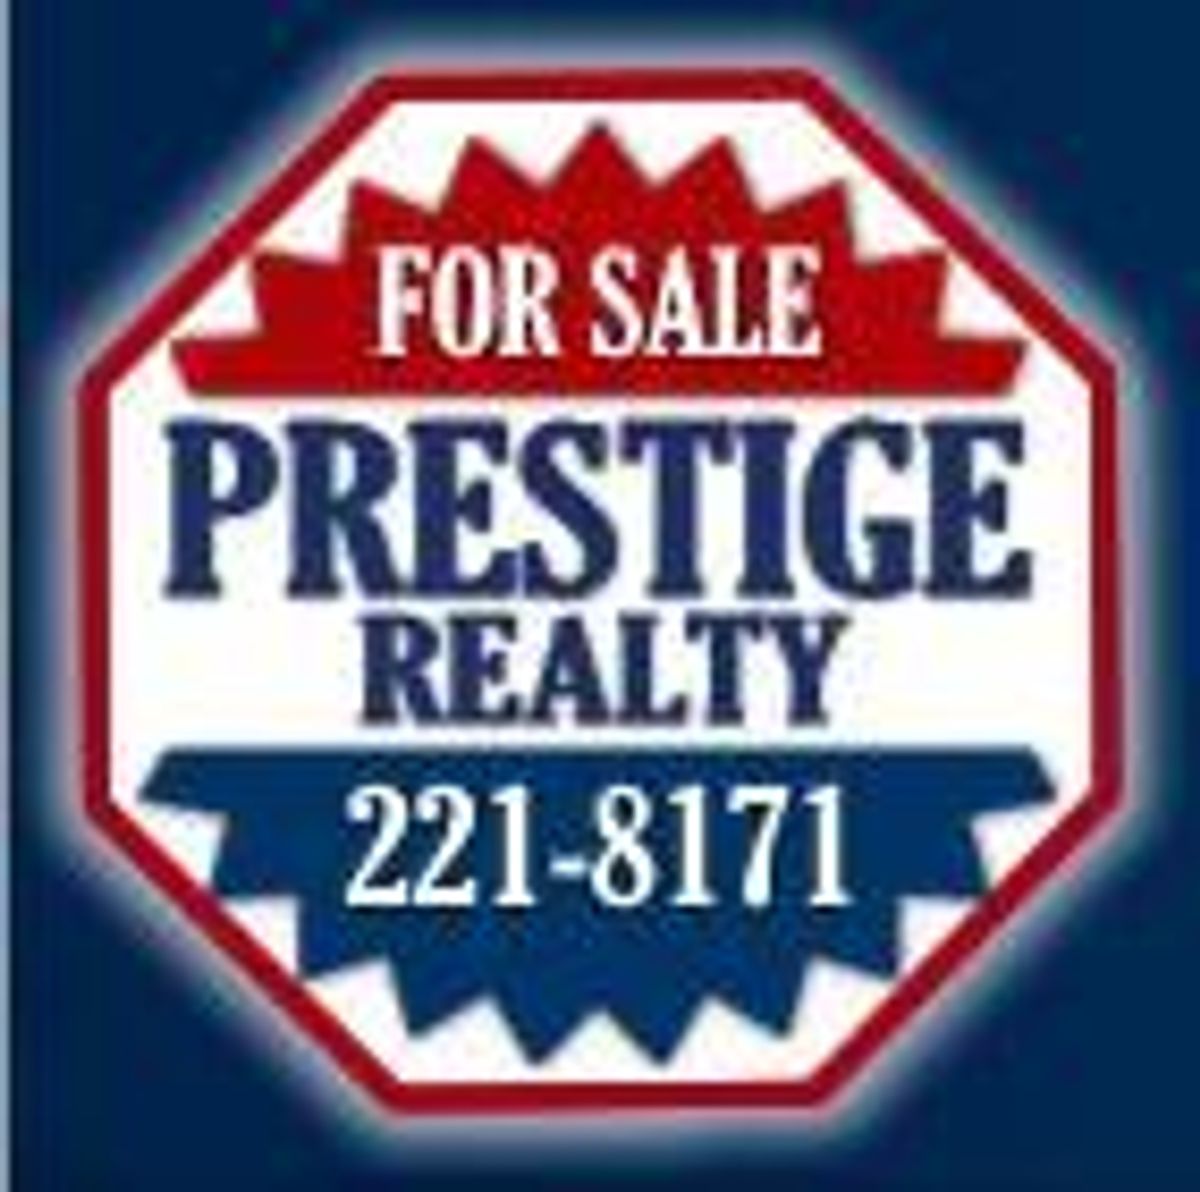 Photo for Lisa Kairy, Listing Agent at Prestige Realty, Inc